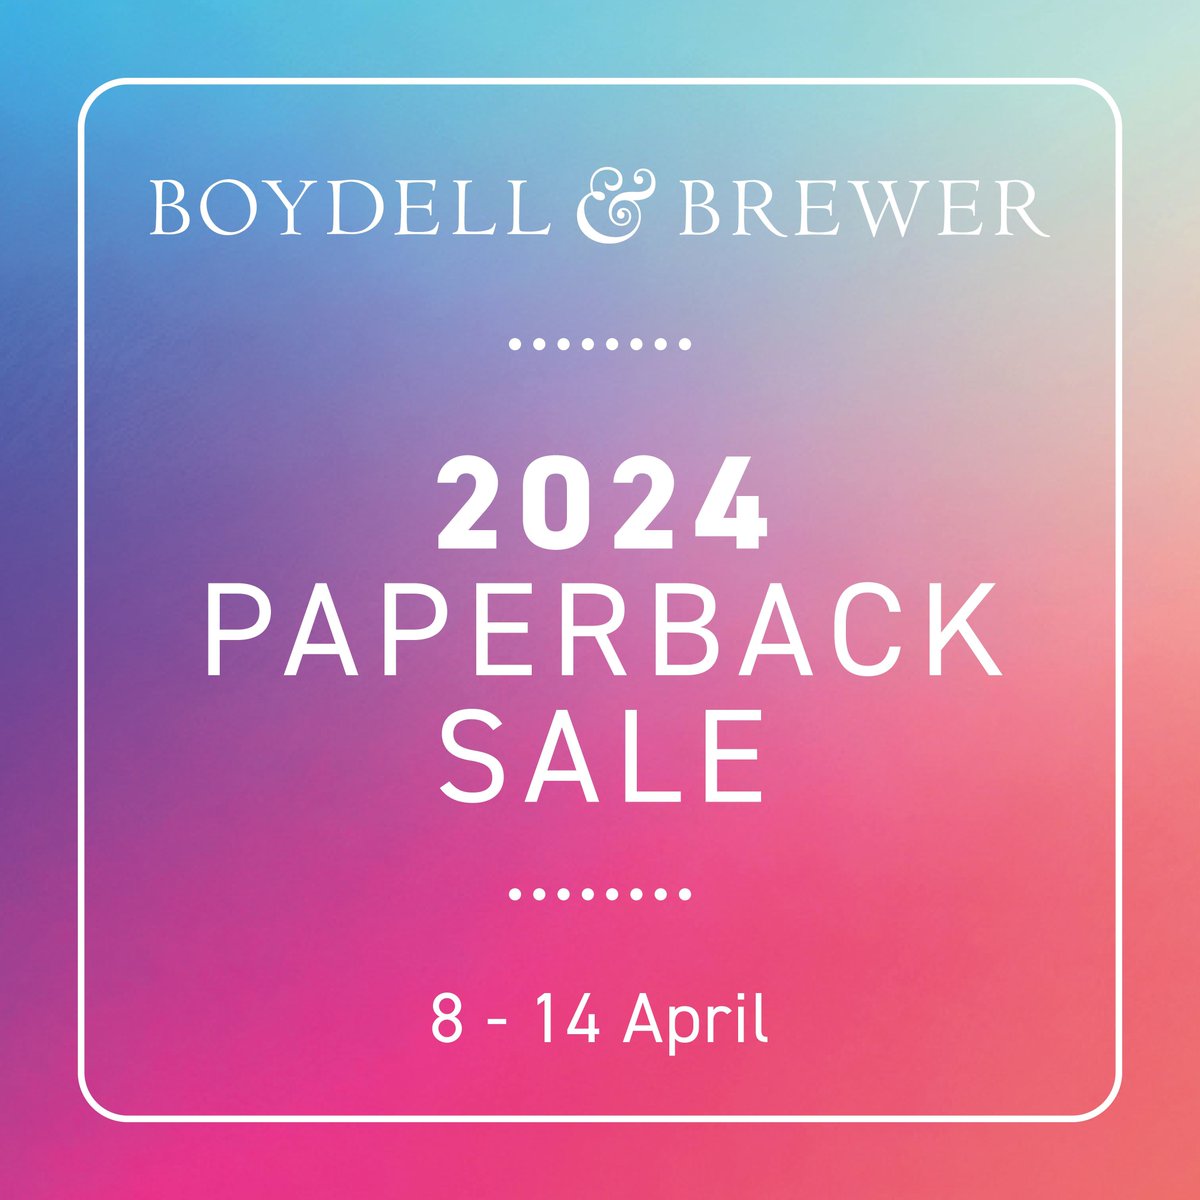 Less than one week until our paperback sale starts! Browse the more than 1400 titles on offer here: buff.ly/43E1SUL #BookSale #AfricanStudies